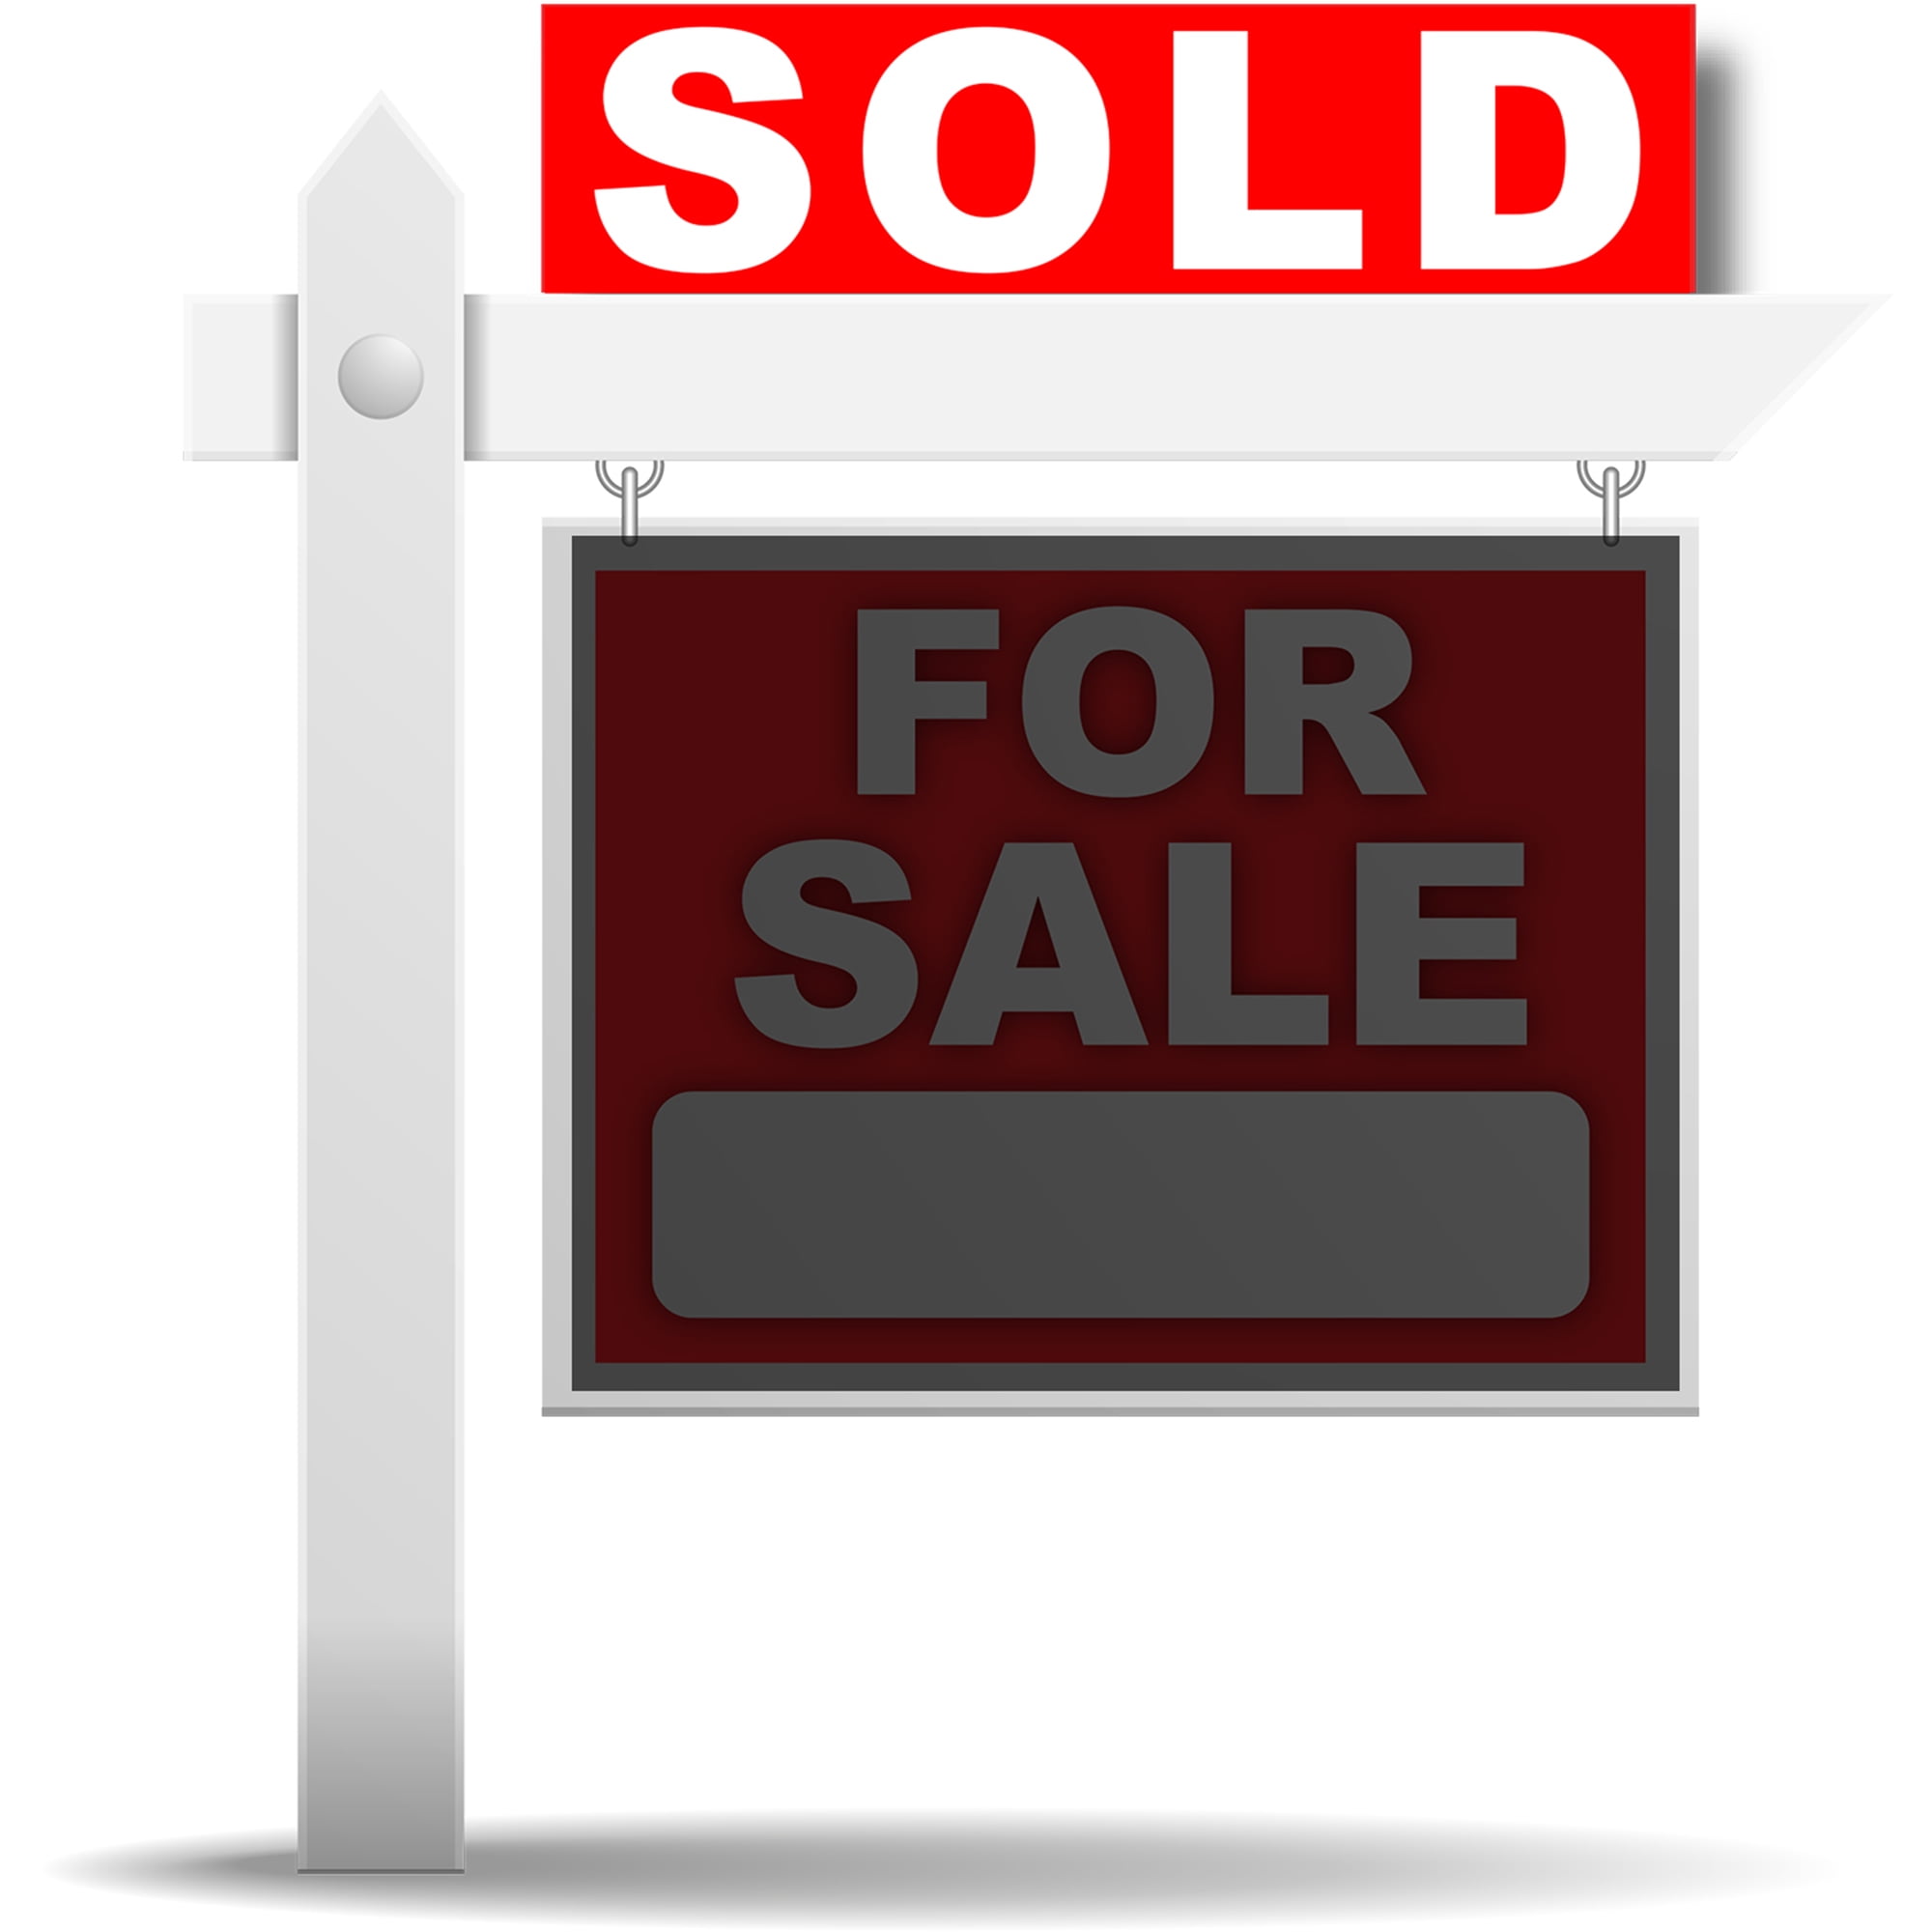 FOR SALE BLACK 6"x24" REAL ESTATE RIDER SIGNS Buy 1 Get 1 FREE 2 Sided 